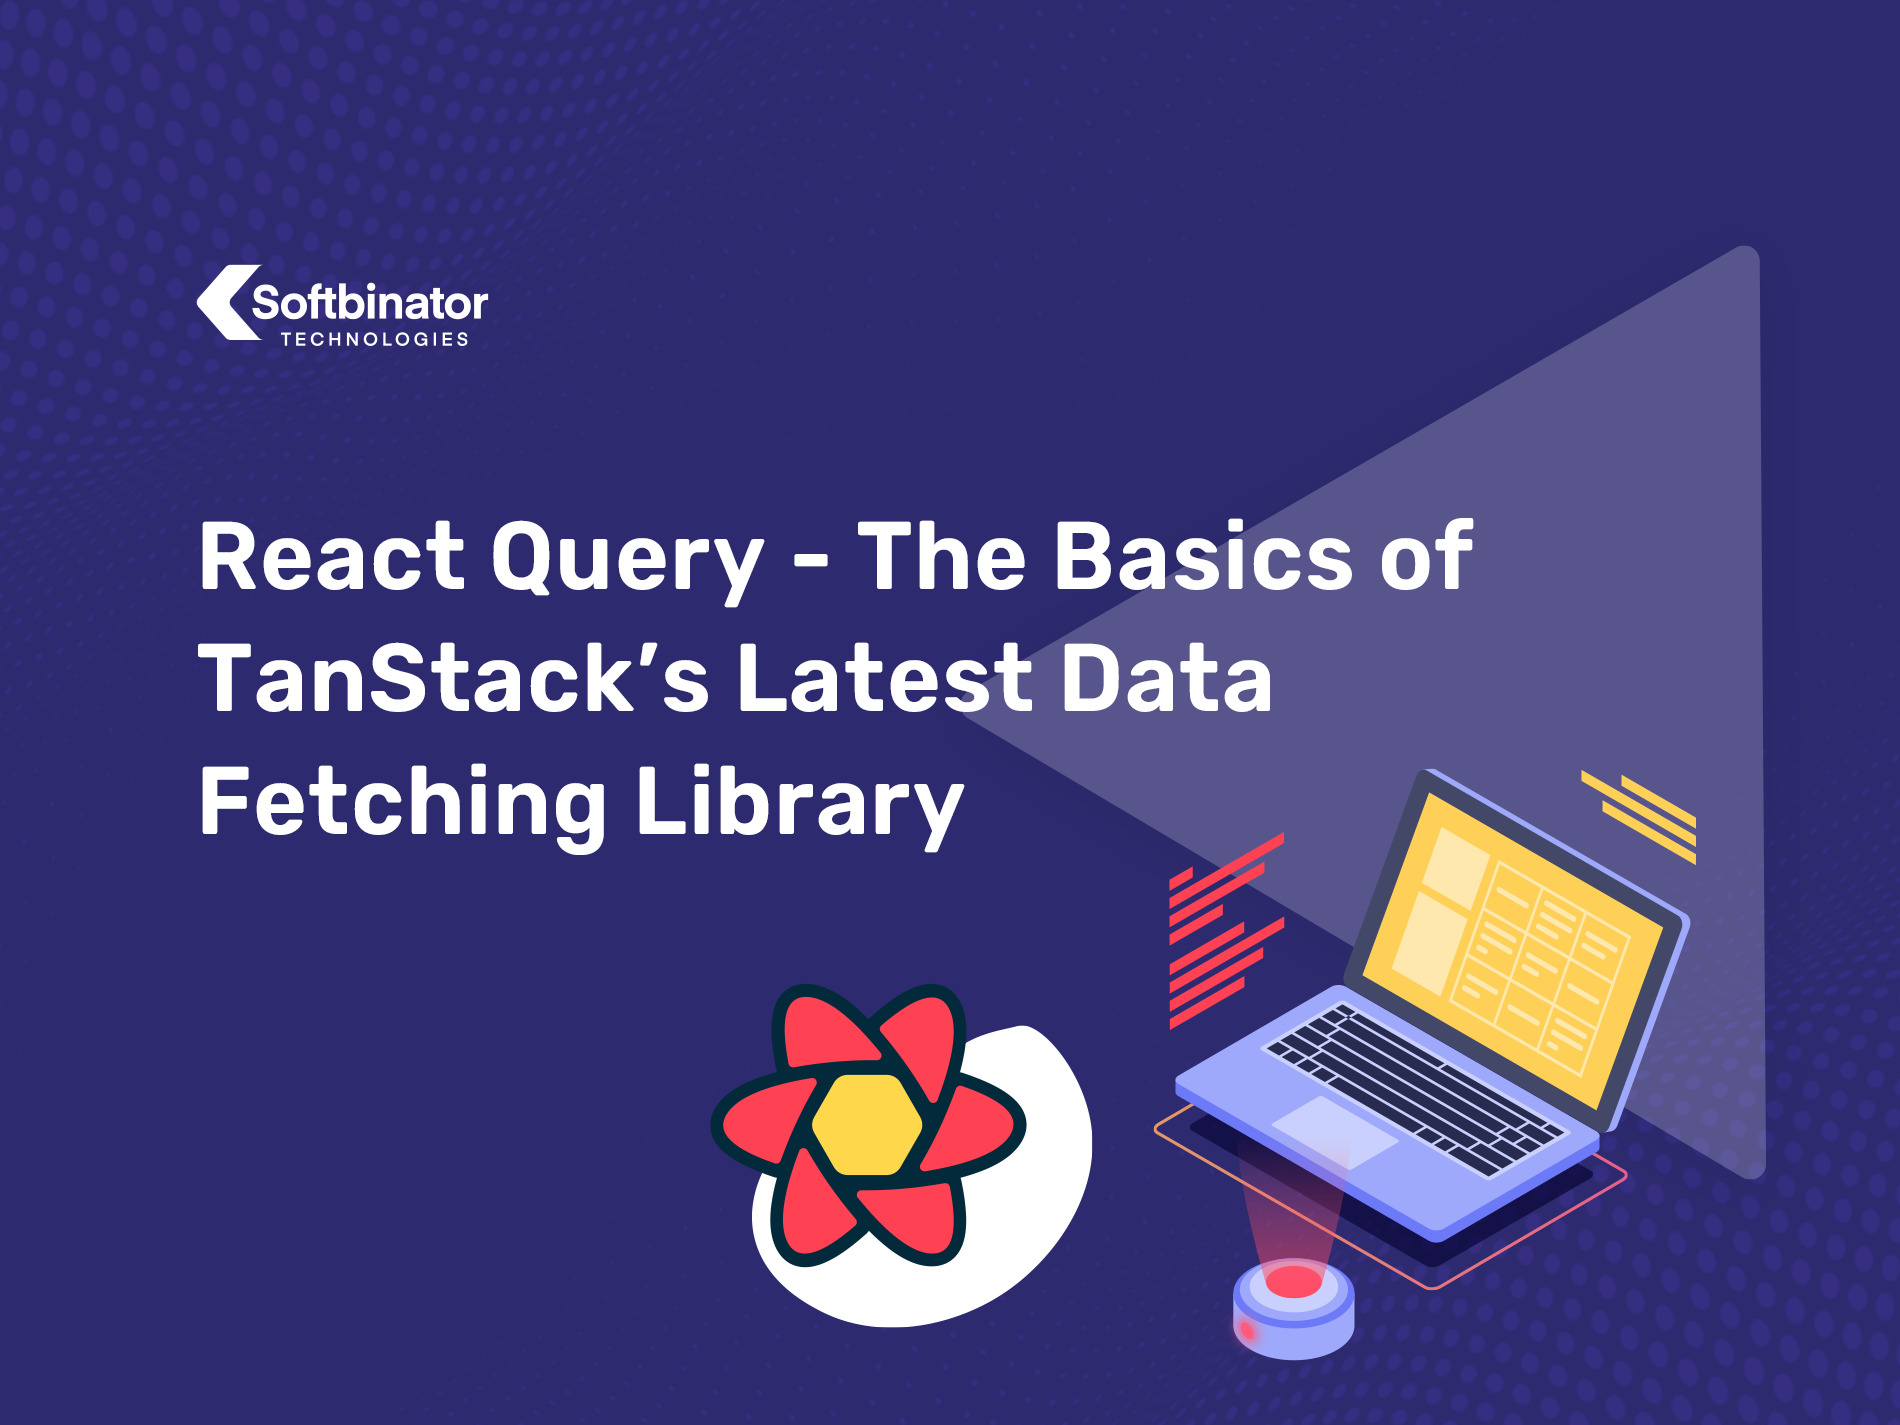 React Query - The Basics of TanStack’s Latest Data Fetching Library